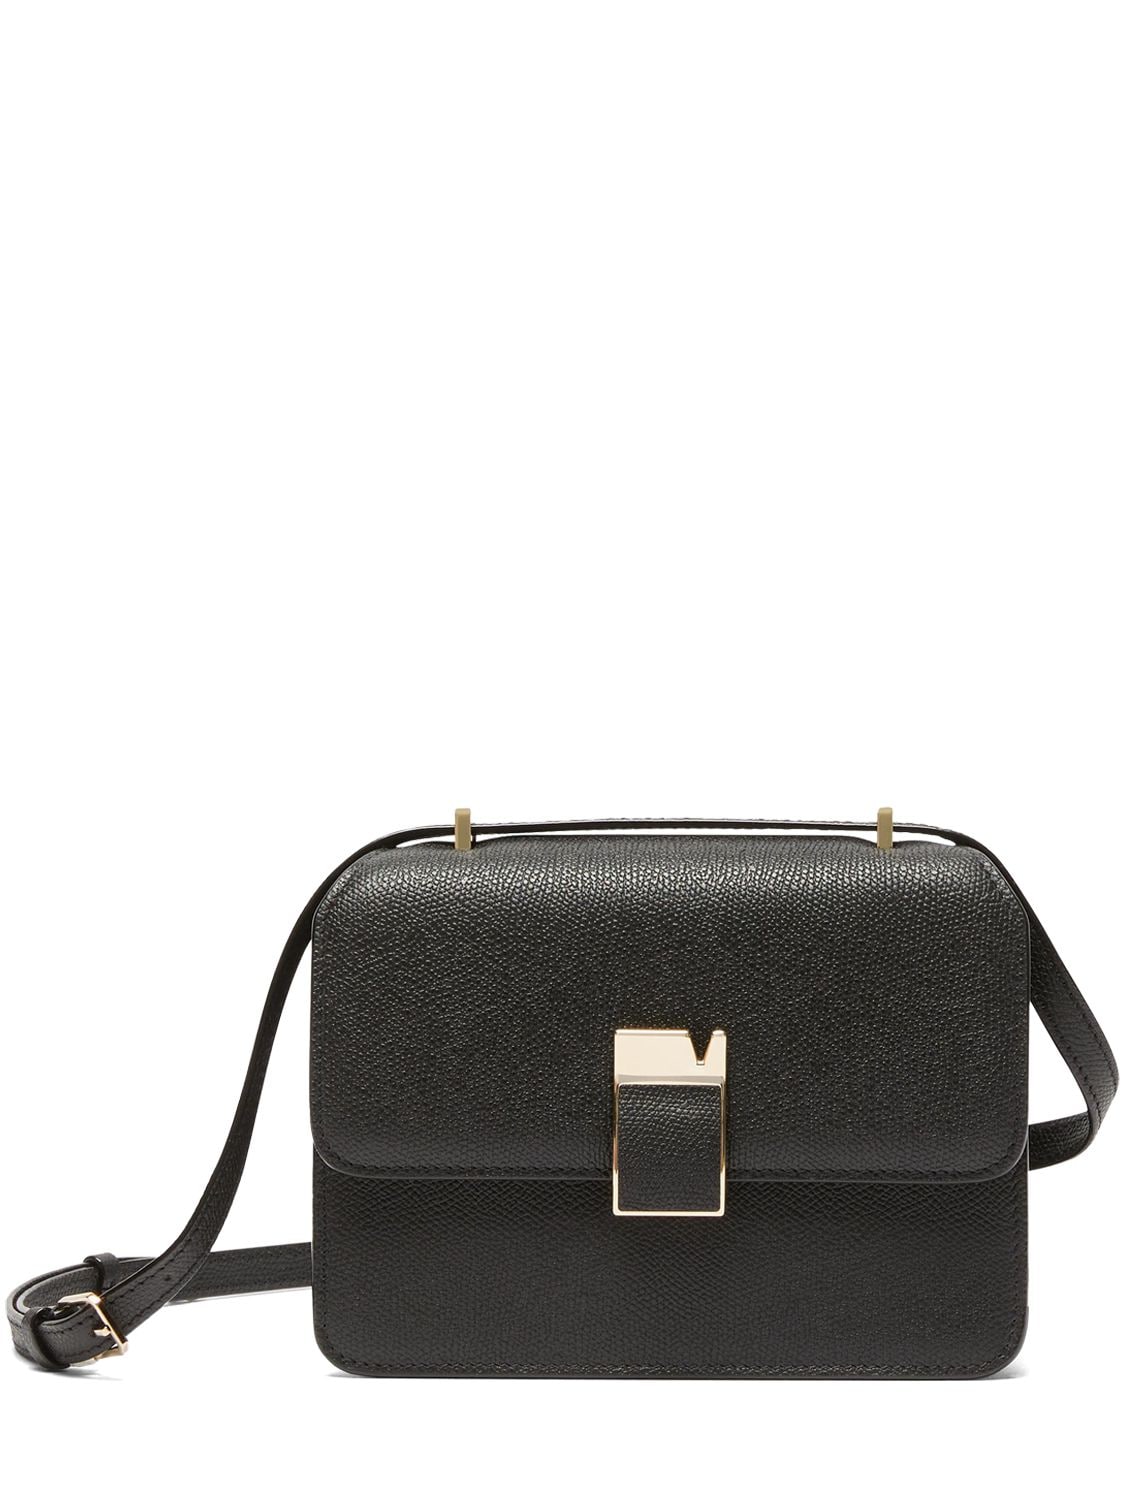 Valextra Small Nolo Leather Shoulder Bag In Black